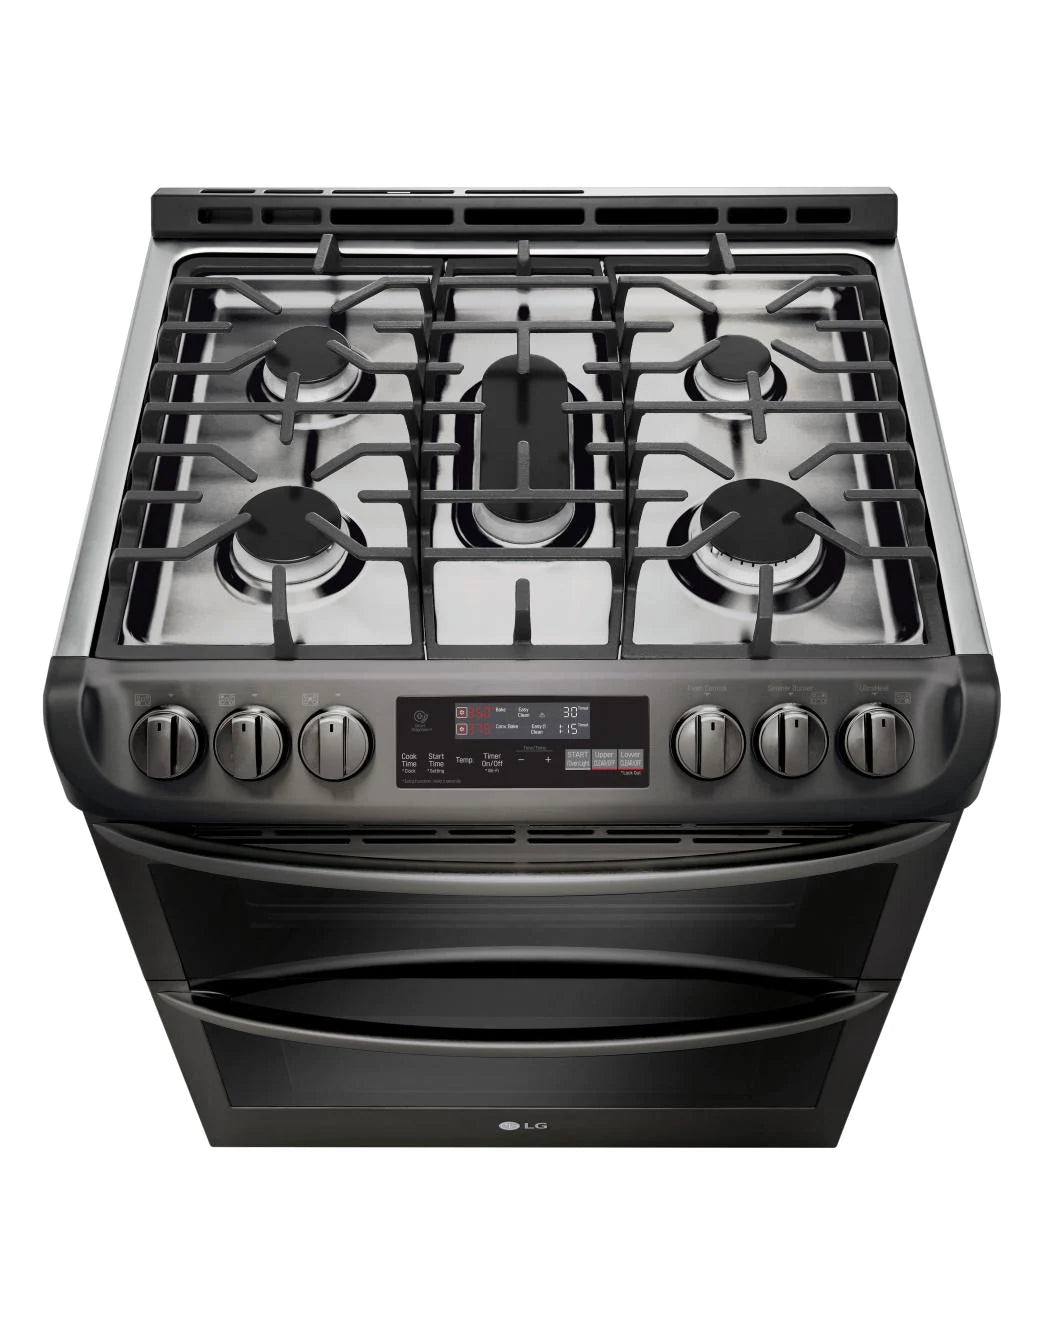 6.9 cu. ft. Smart wi-fi Enabled Gas Double Oven Slide-In Range with ProBake Convection® and EasyClean® - LG - LTG4715BD